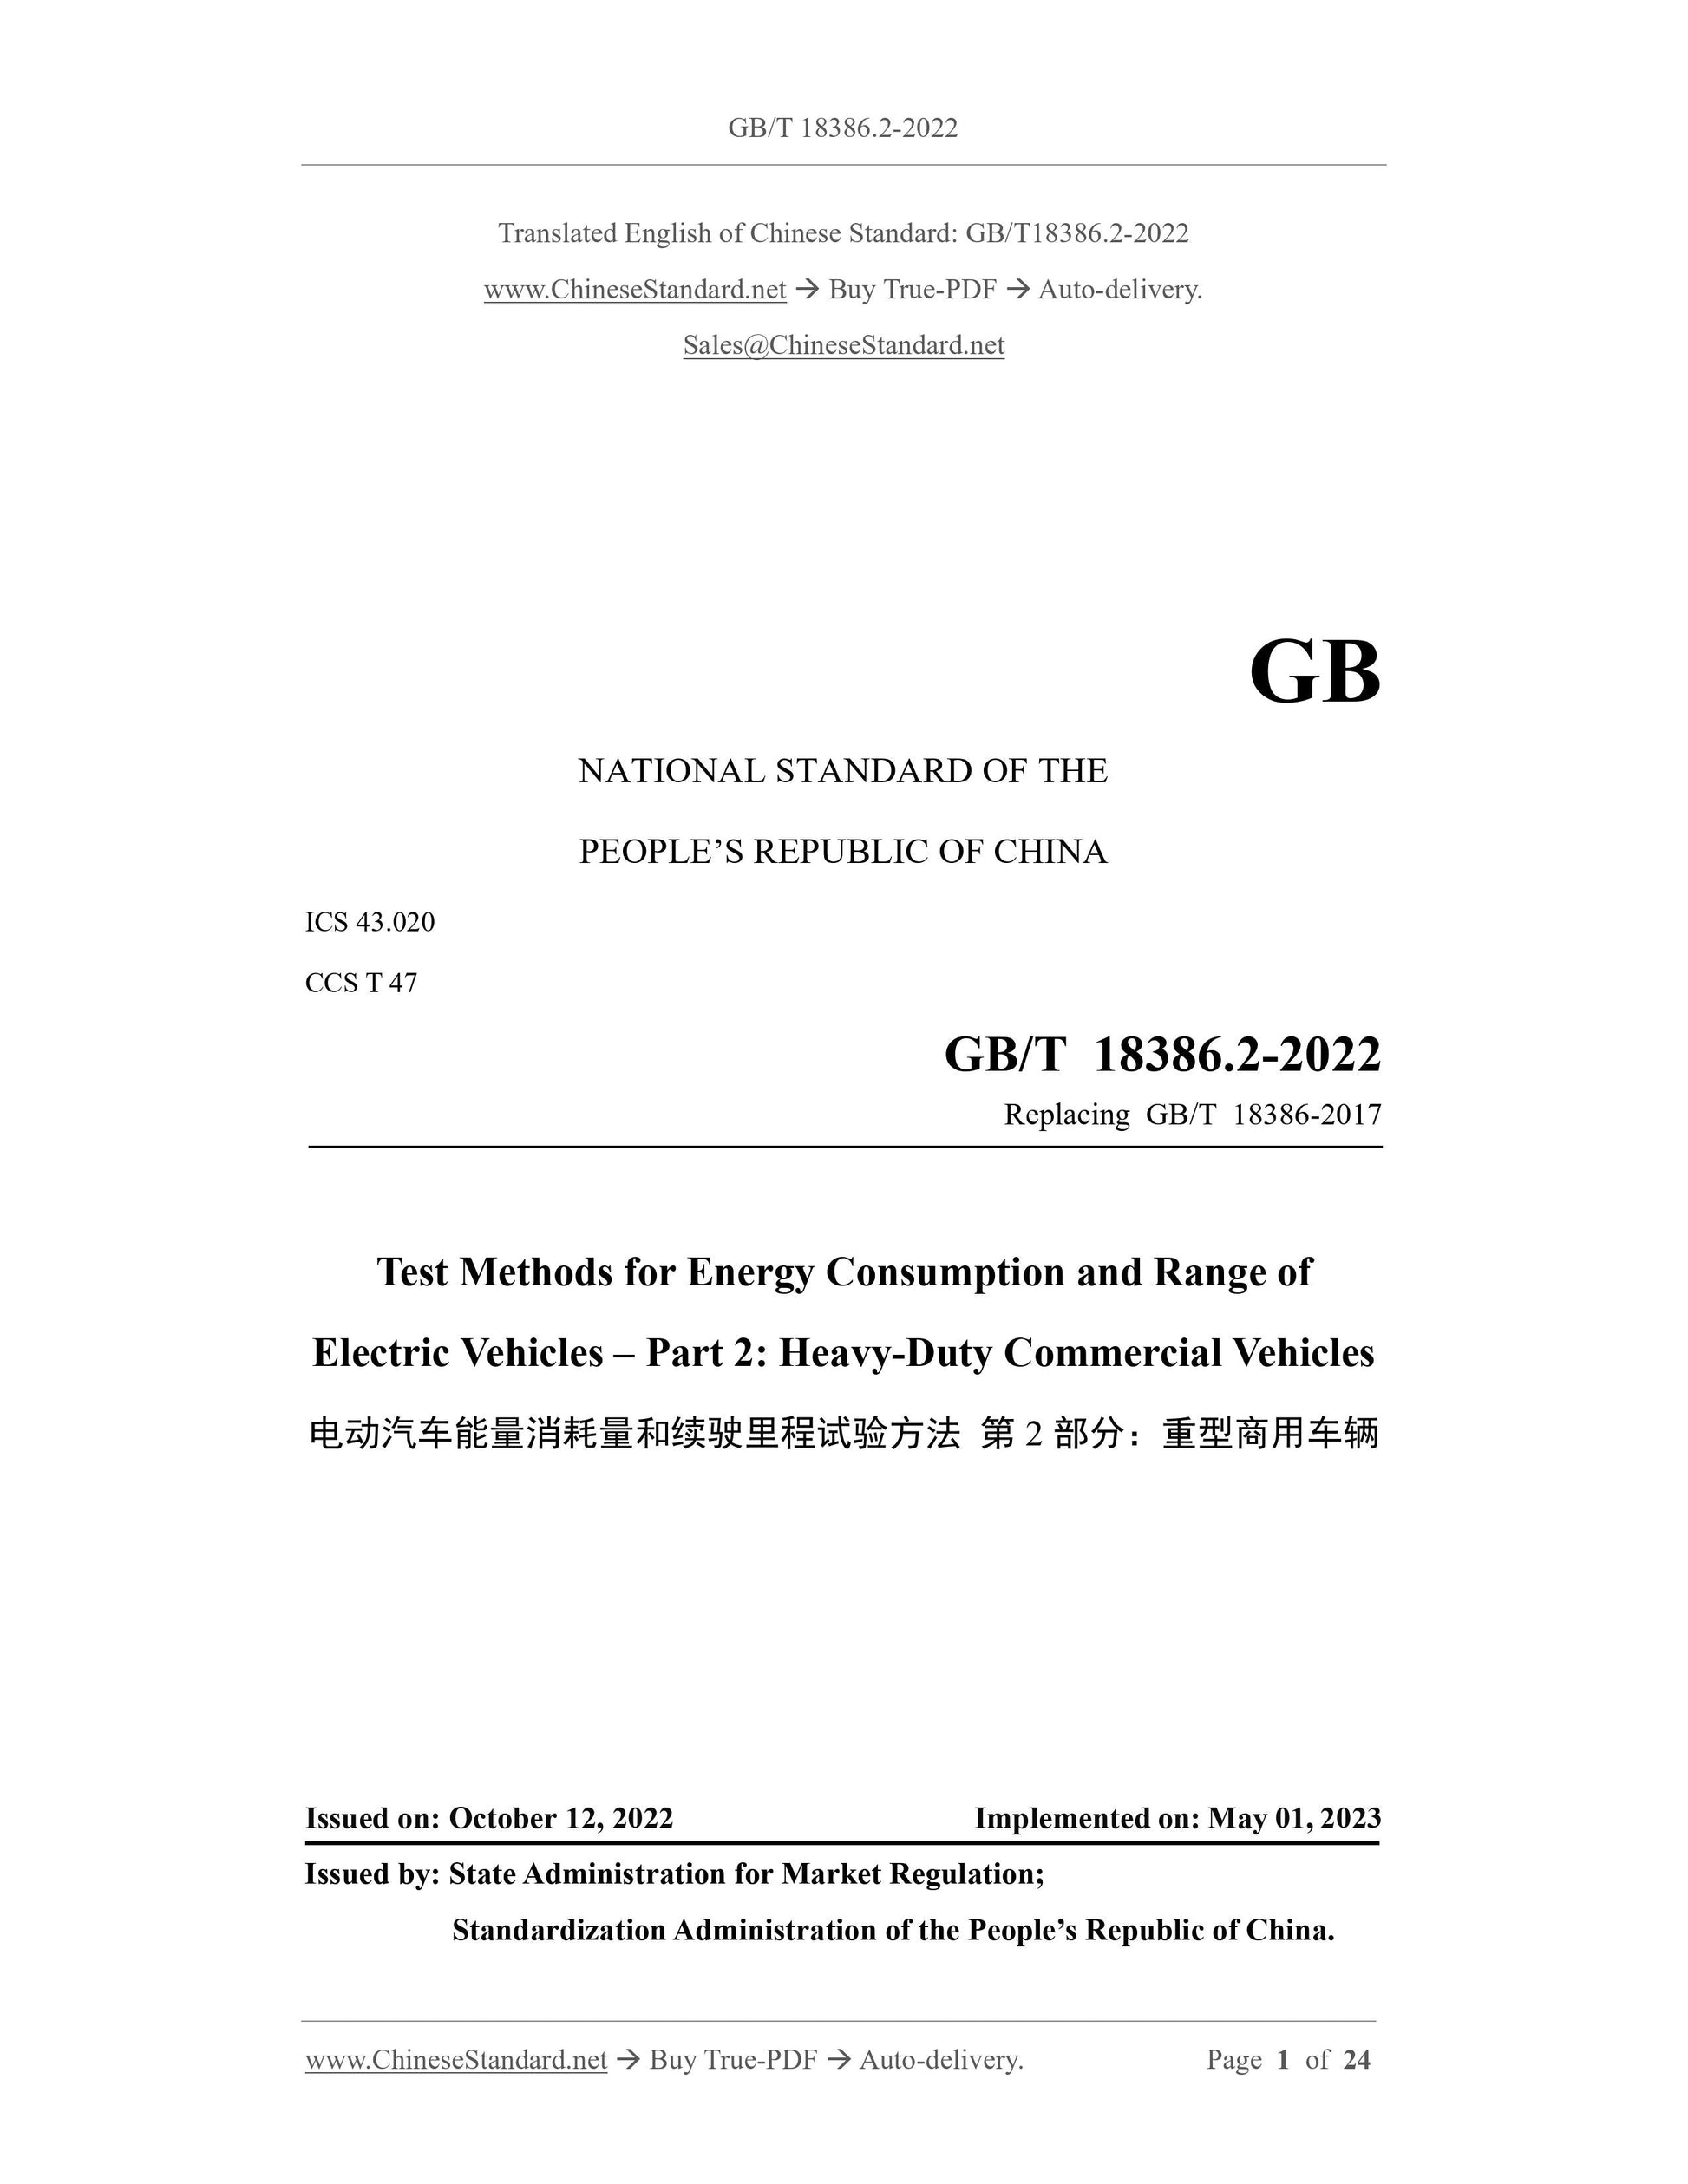 GB/T 18386.2-2022 Page 1